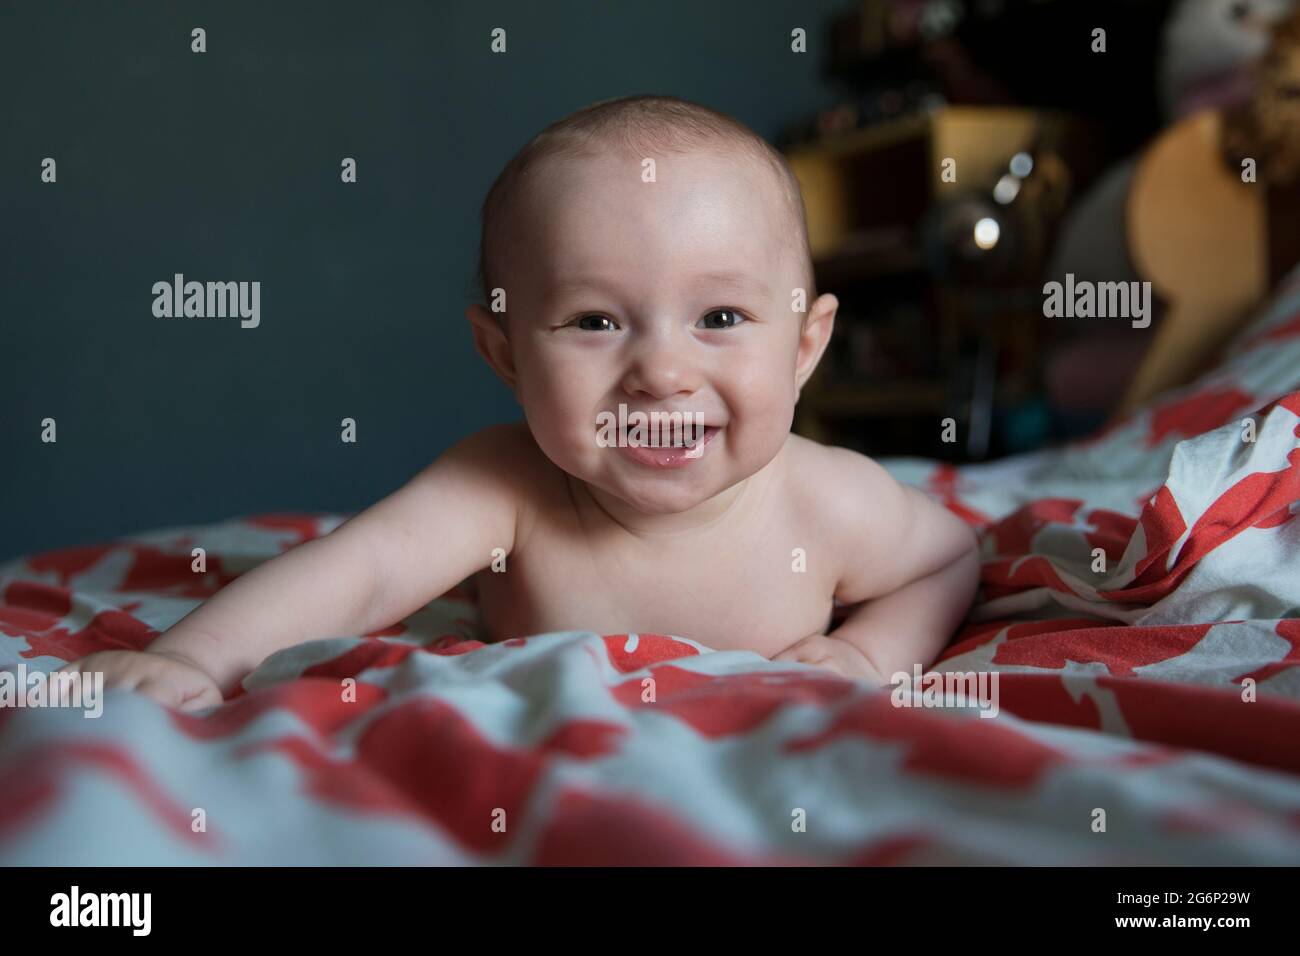 A portrait of a baby Stock Photo